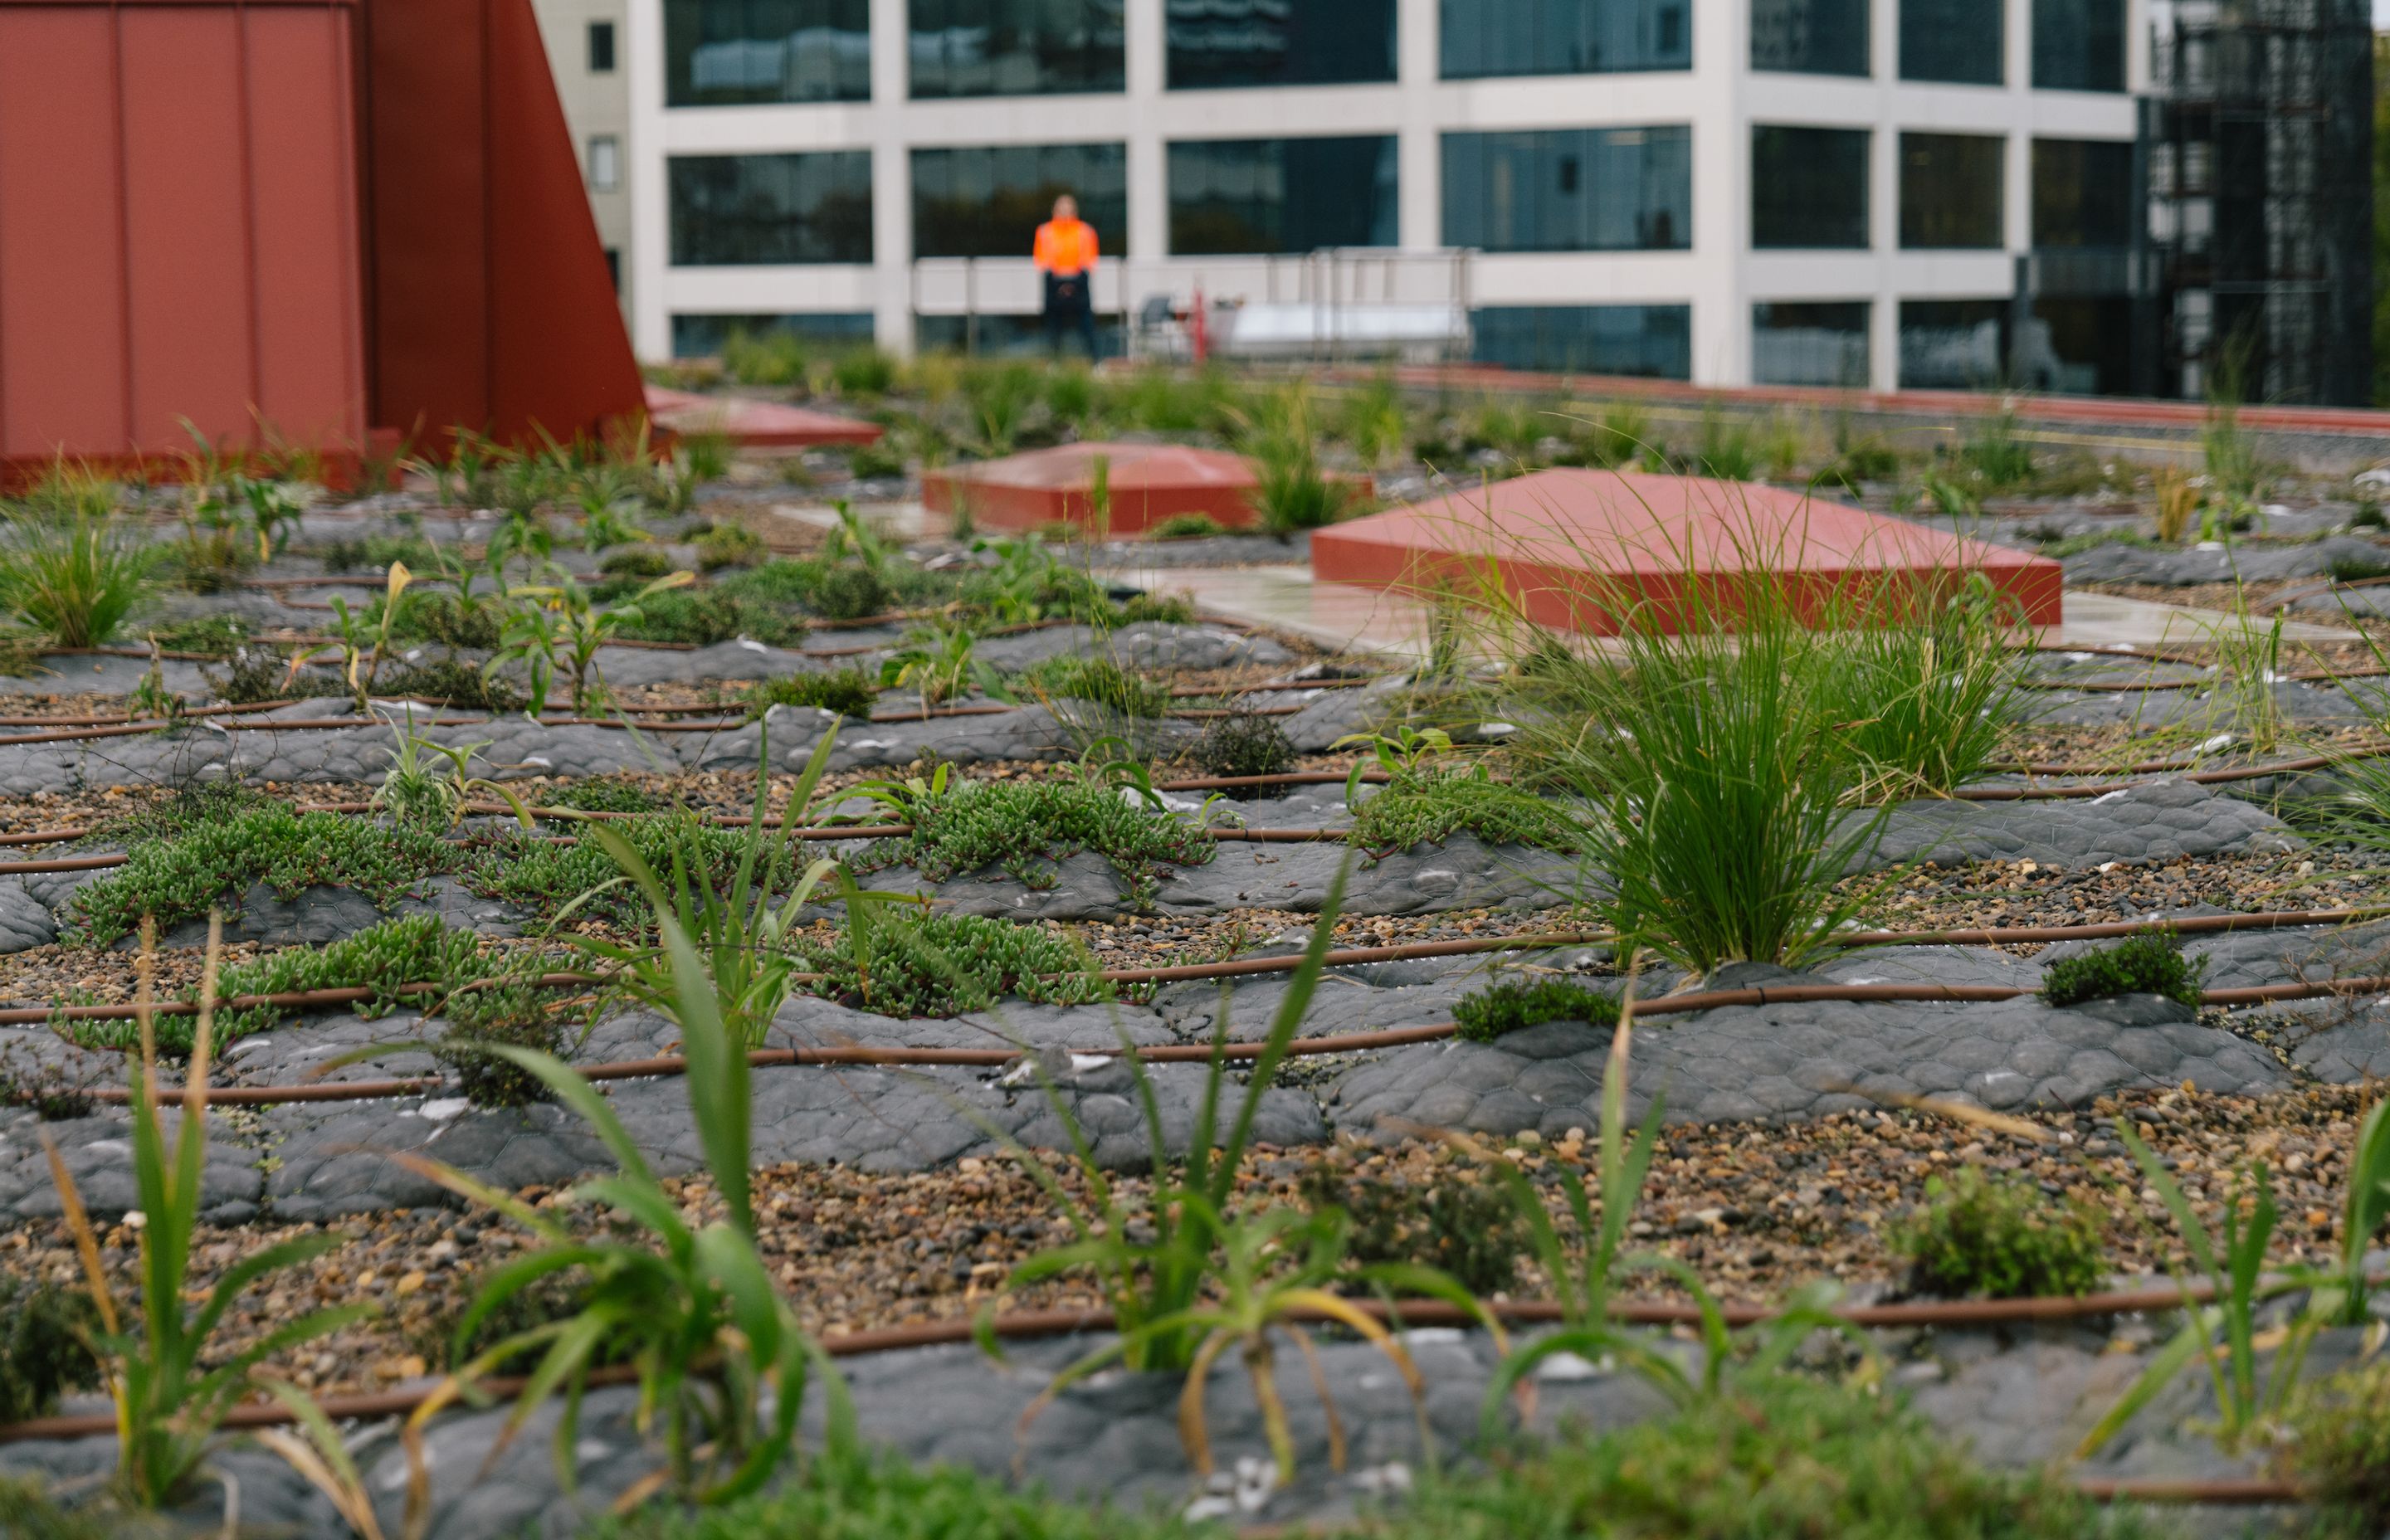 A total of 560 ‘Eco Pillows’ were installed on the roof of Auckland City Library.